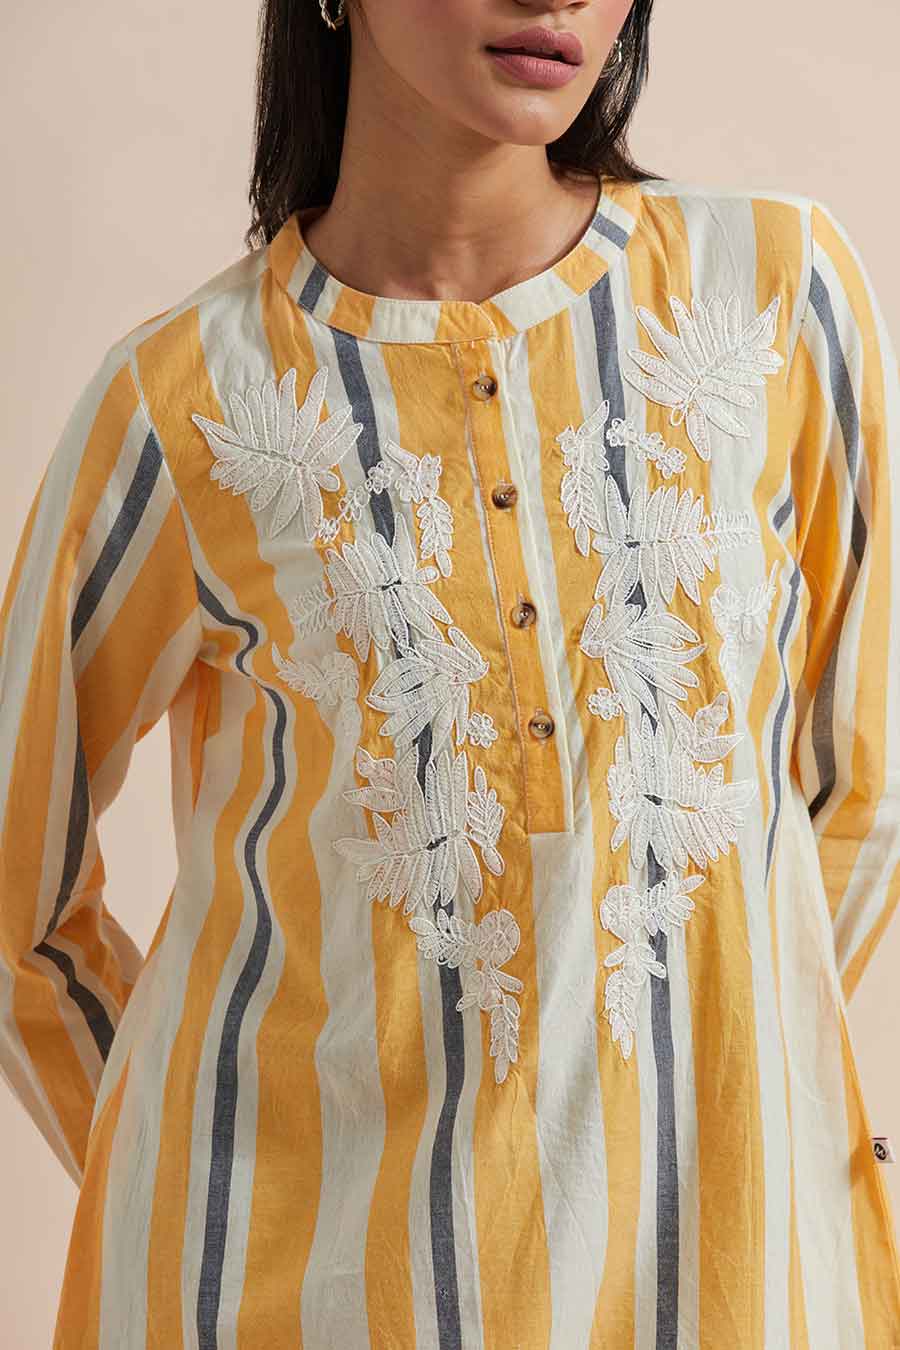 Yellow Stripe Cotton Embroidered Top